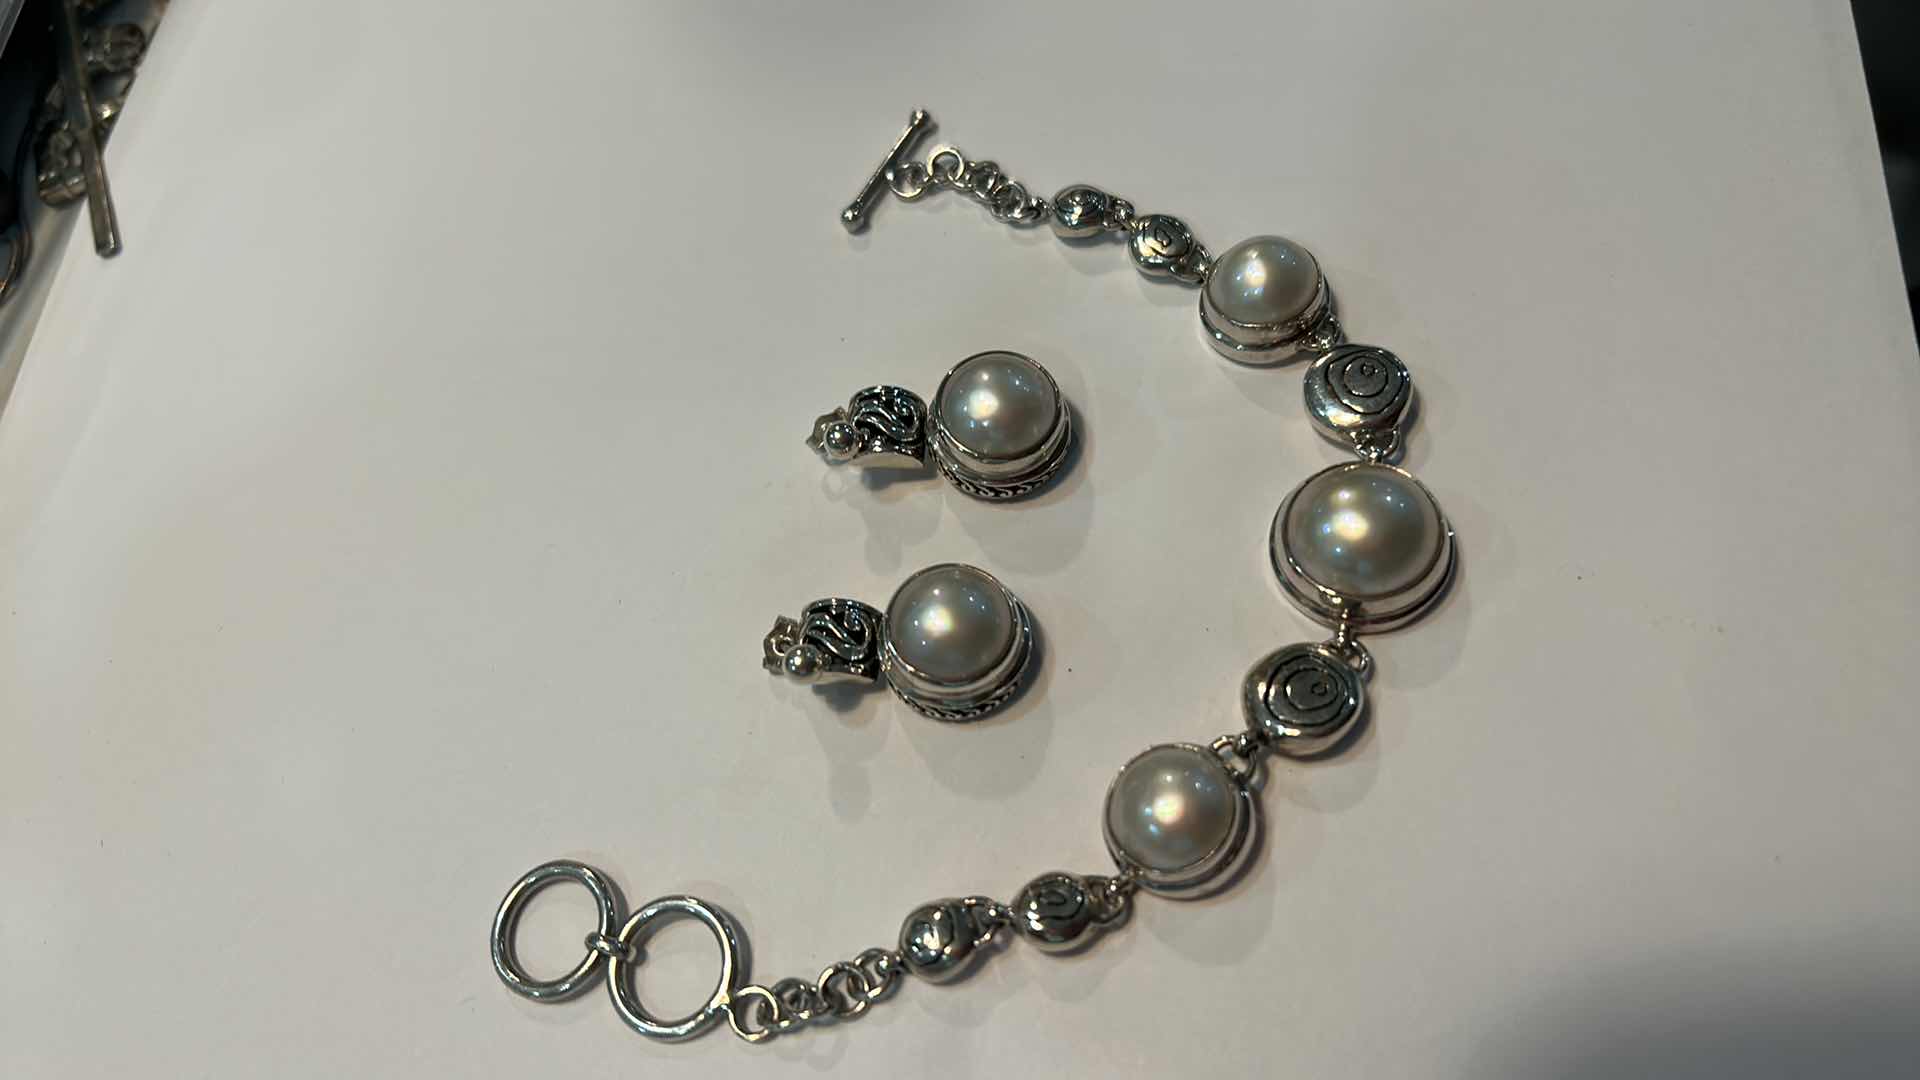 Photo 3 of FINE JEWELRY- .925 STERLING SILVER BRACELET AND EARRINGS WITH PEARLS